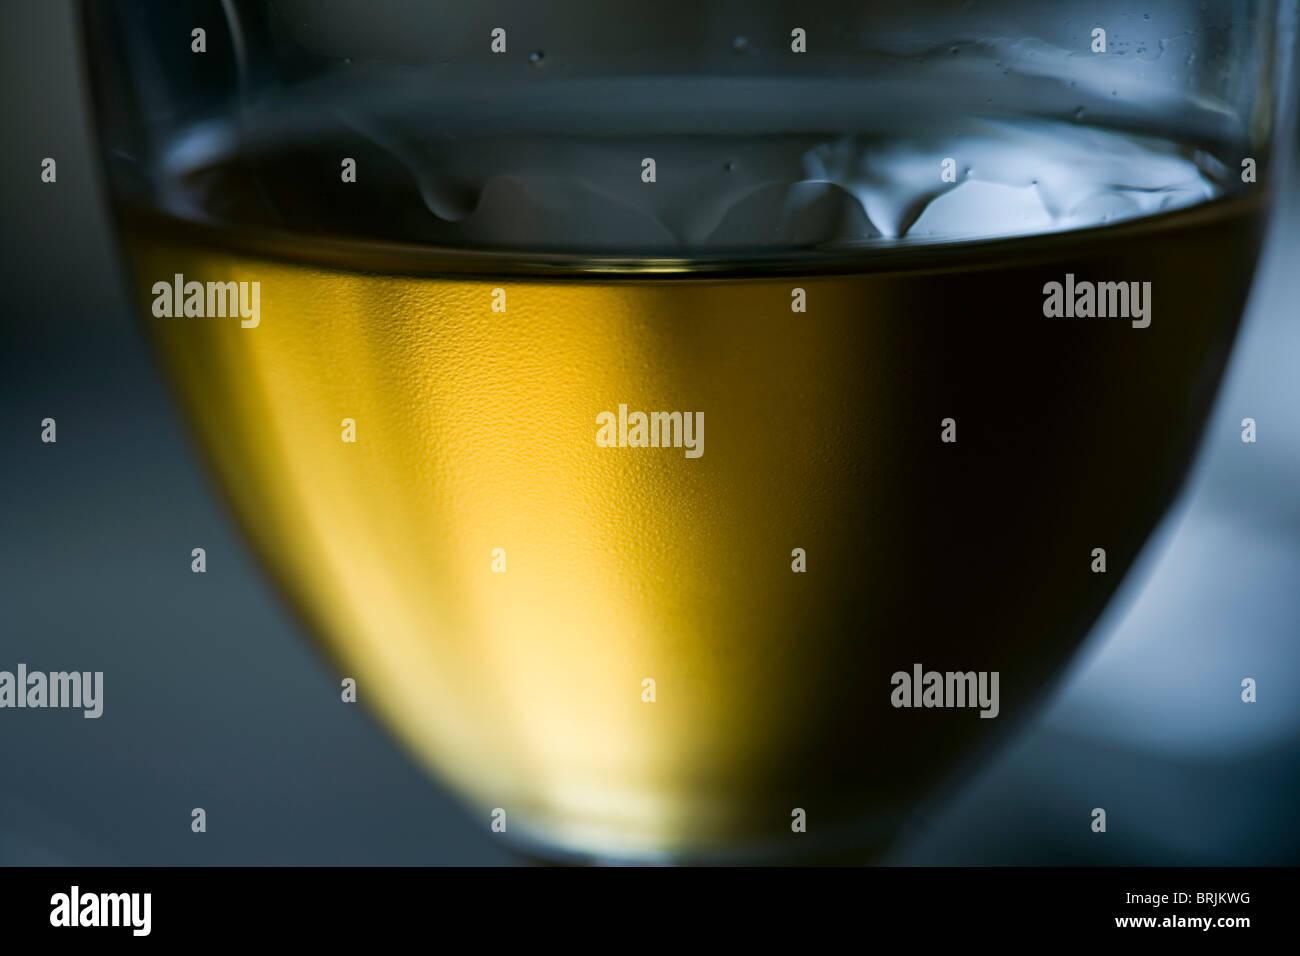 Tears of wine on chilled glass of white wine Stock Photo